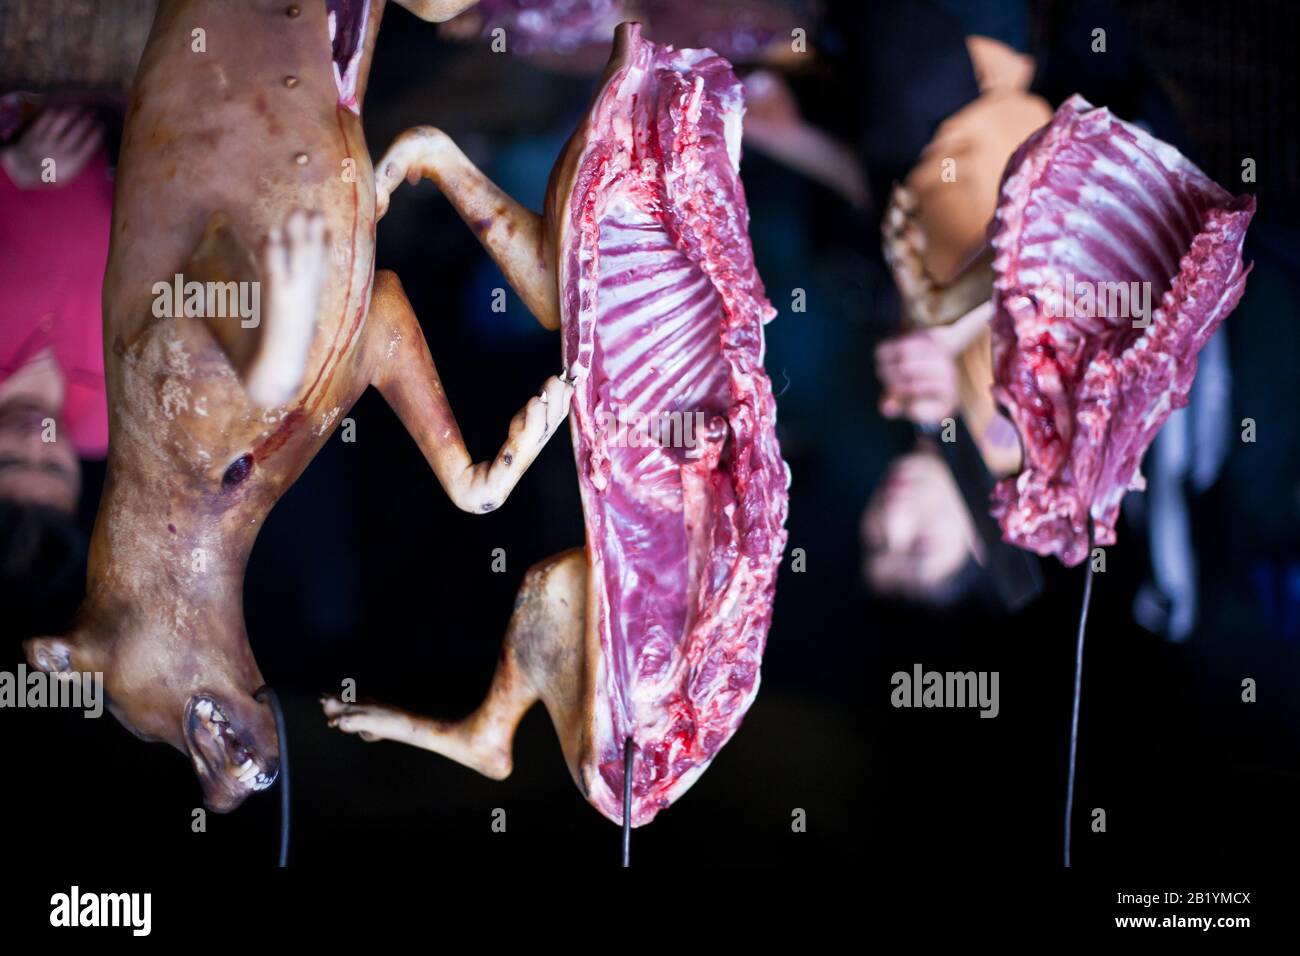 Dog meat hanging  in food market in open air Stock Photo